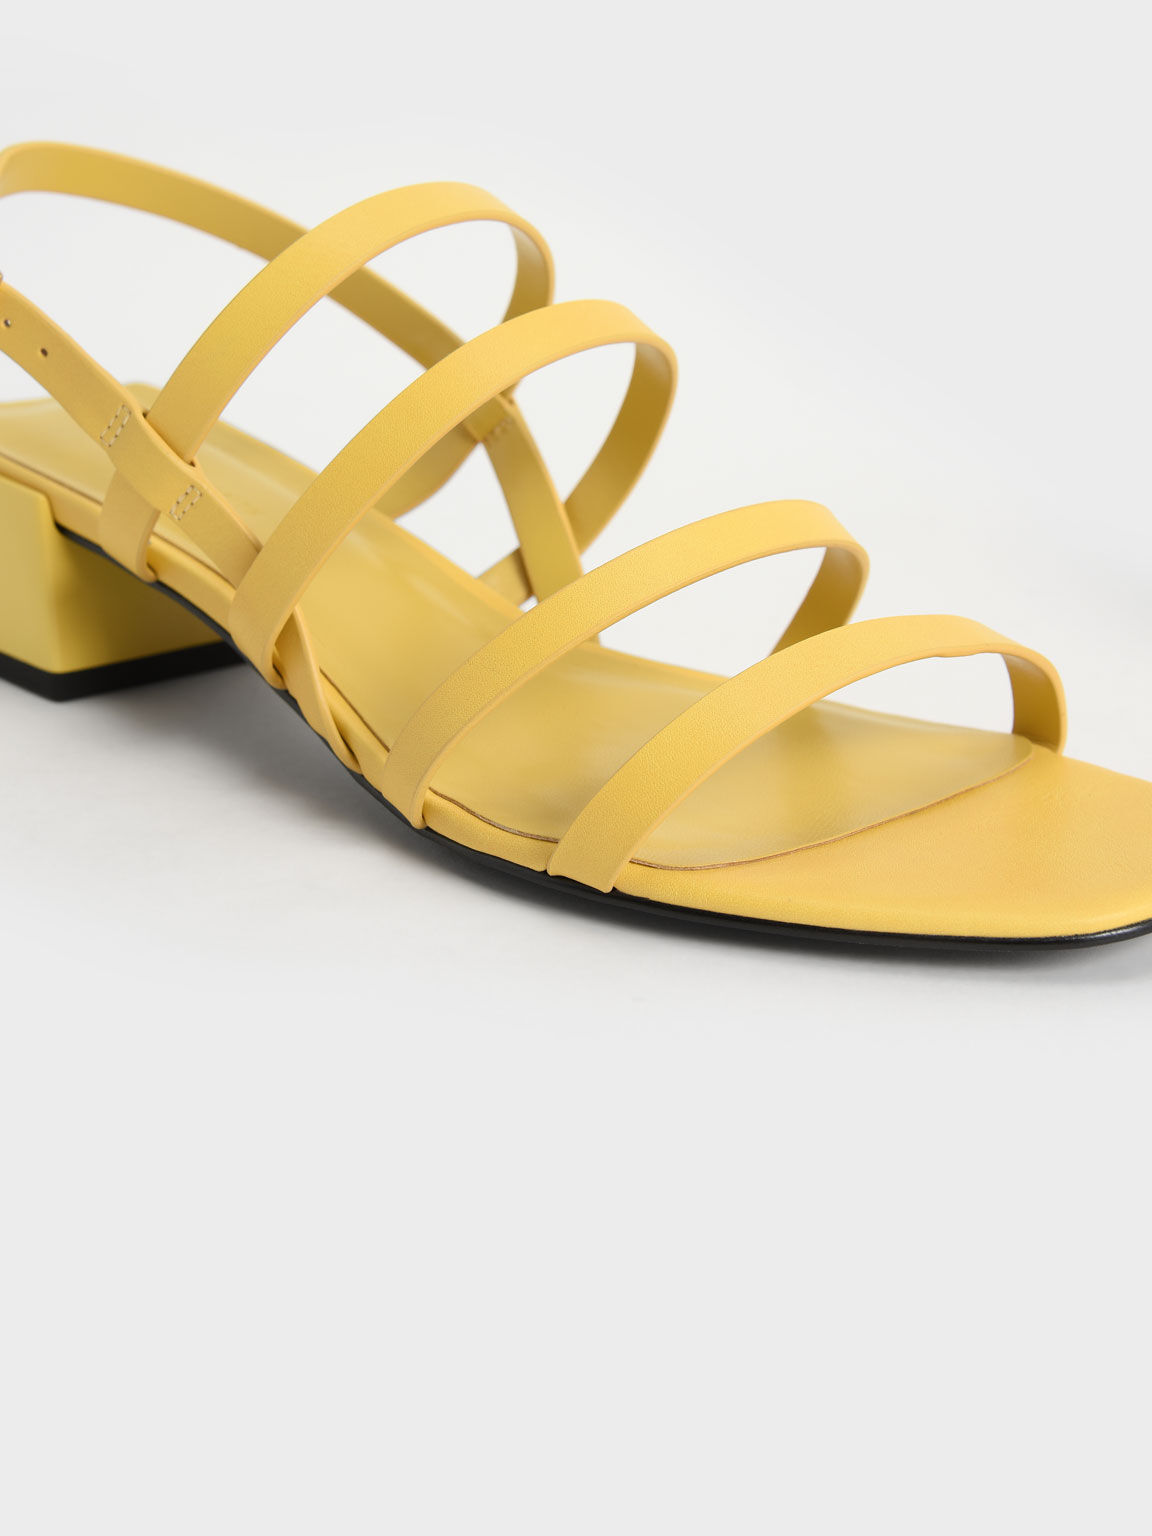 Strappy Geometric Slingback Sandals, Yellow, hi-res